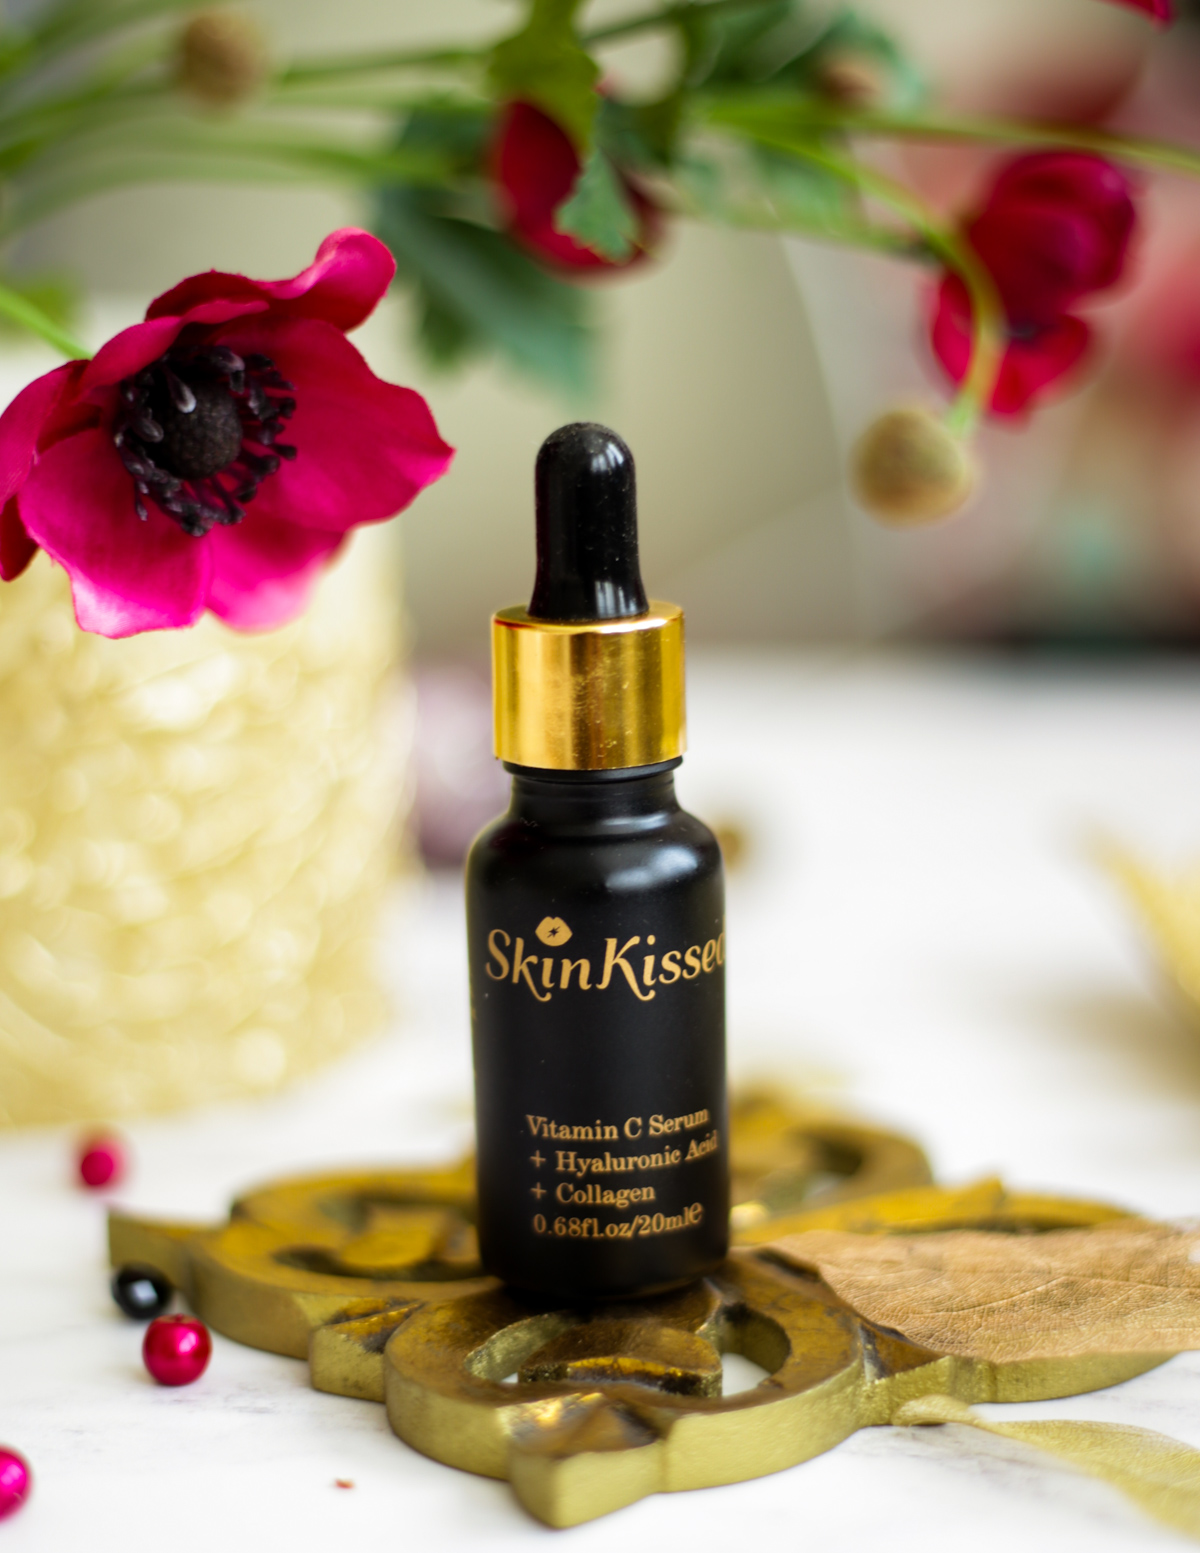 Reviewing the Skinkissed Vitamin C Serum | upright shot